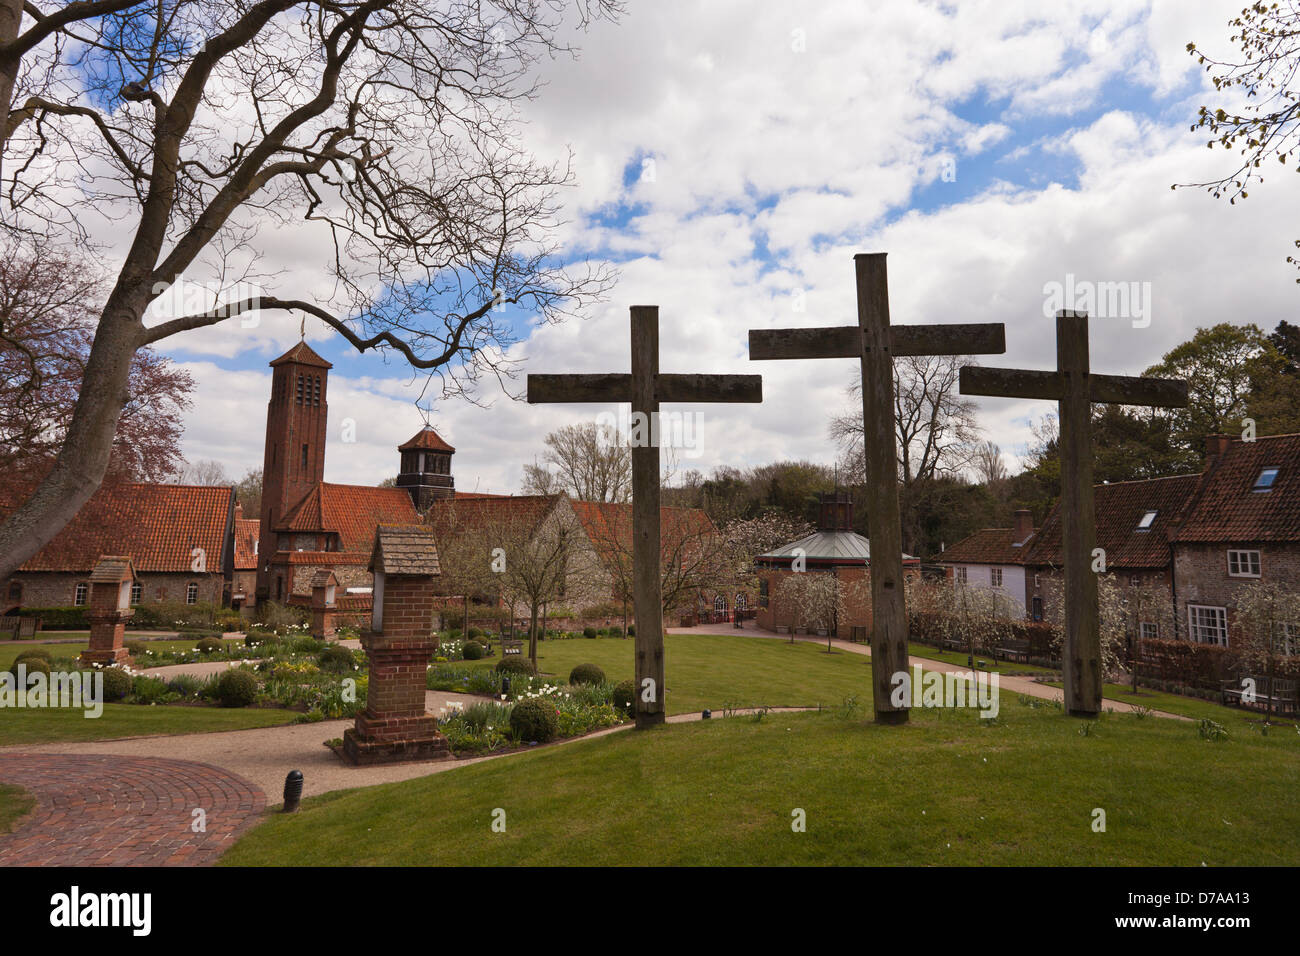 The gardens at the Anglican Shrine church of Our Lady of Walsingham, Little Walsingham, Norfolk. Stock Photo